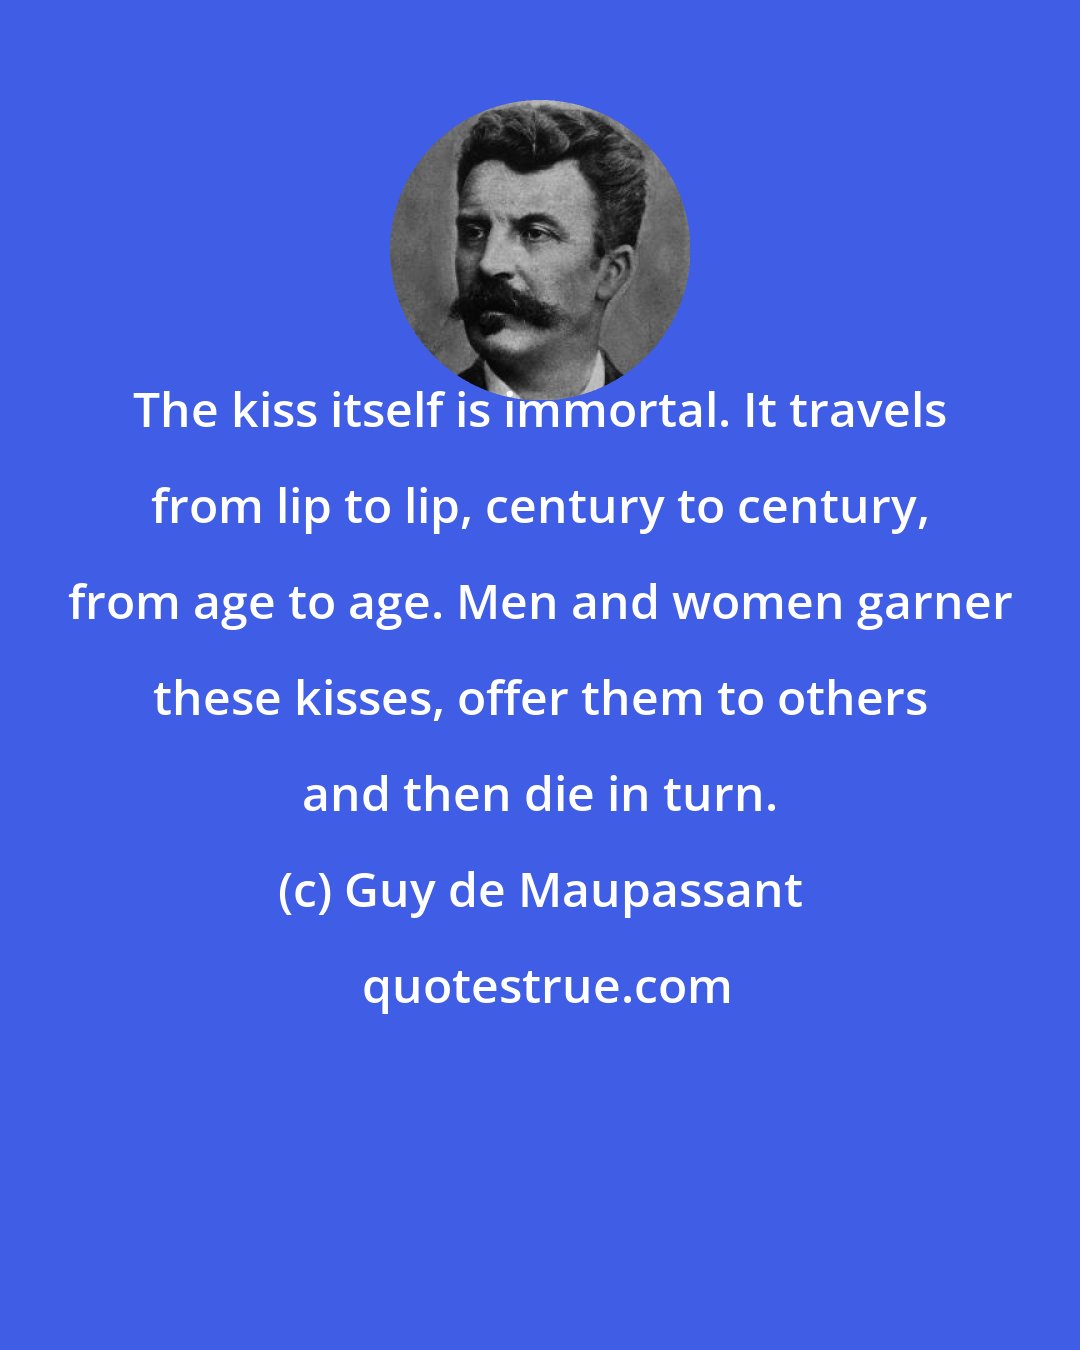 Guy de Maupassant: The kiss itself is immortal. It travels from lip to lip, century to century, from age to age. Men and women garner these kisses, offer them to others and then die in turn.